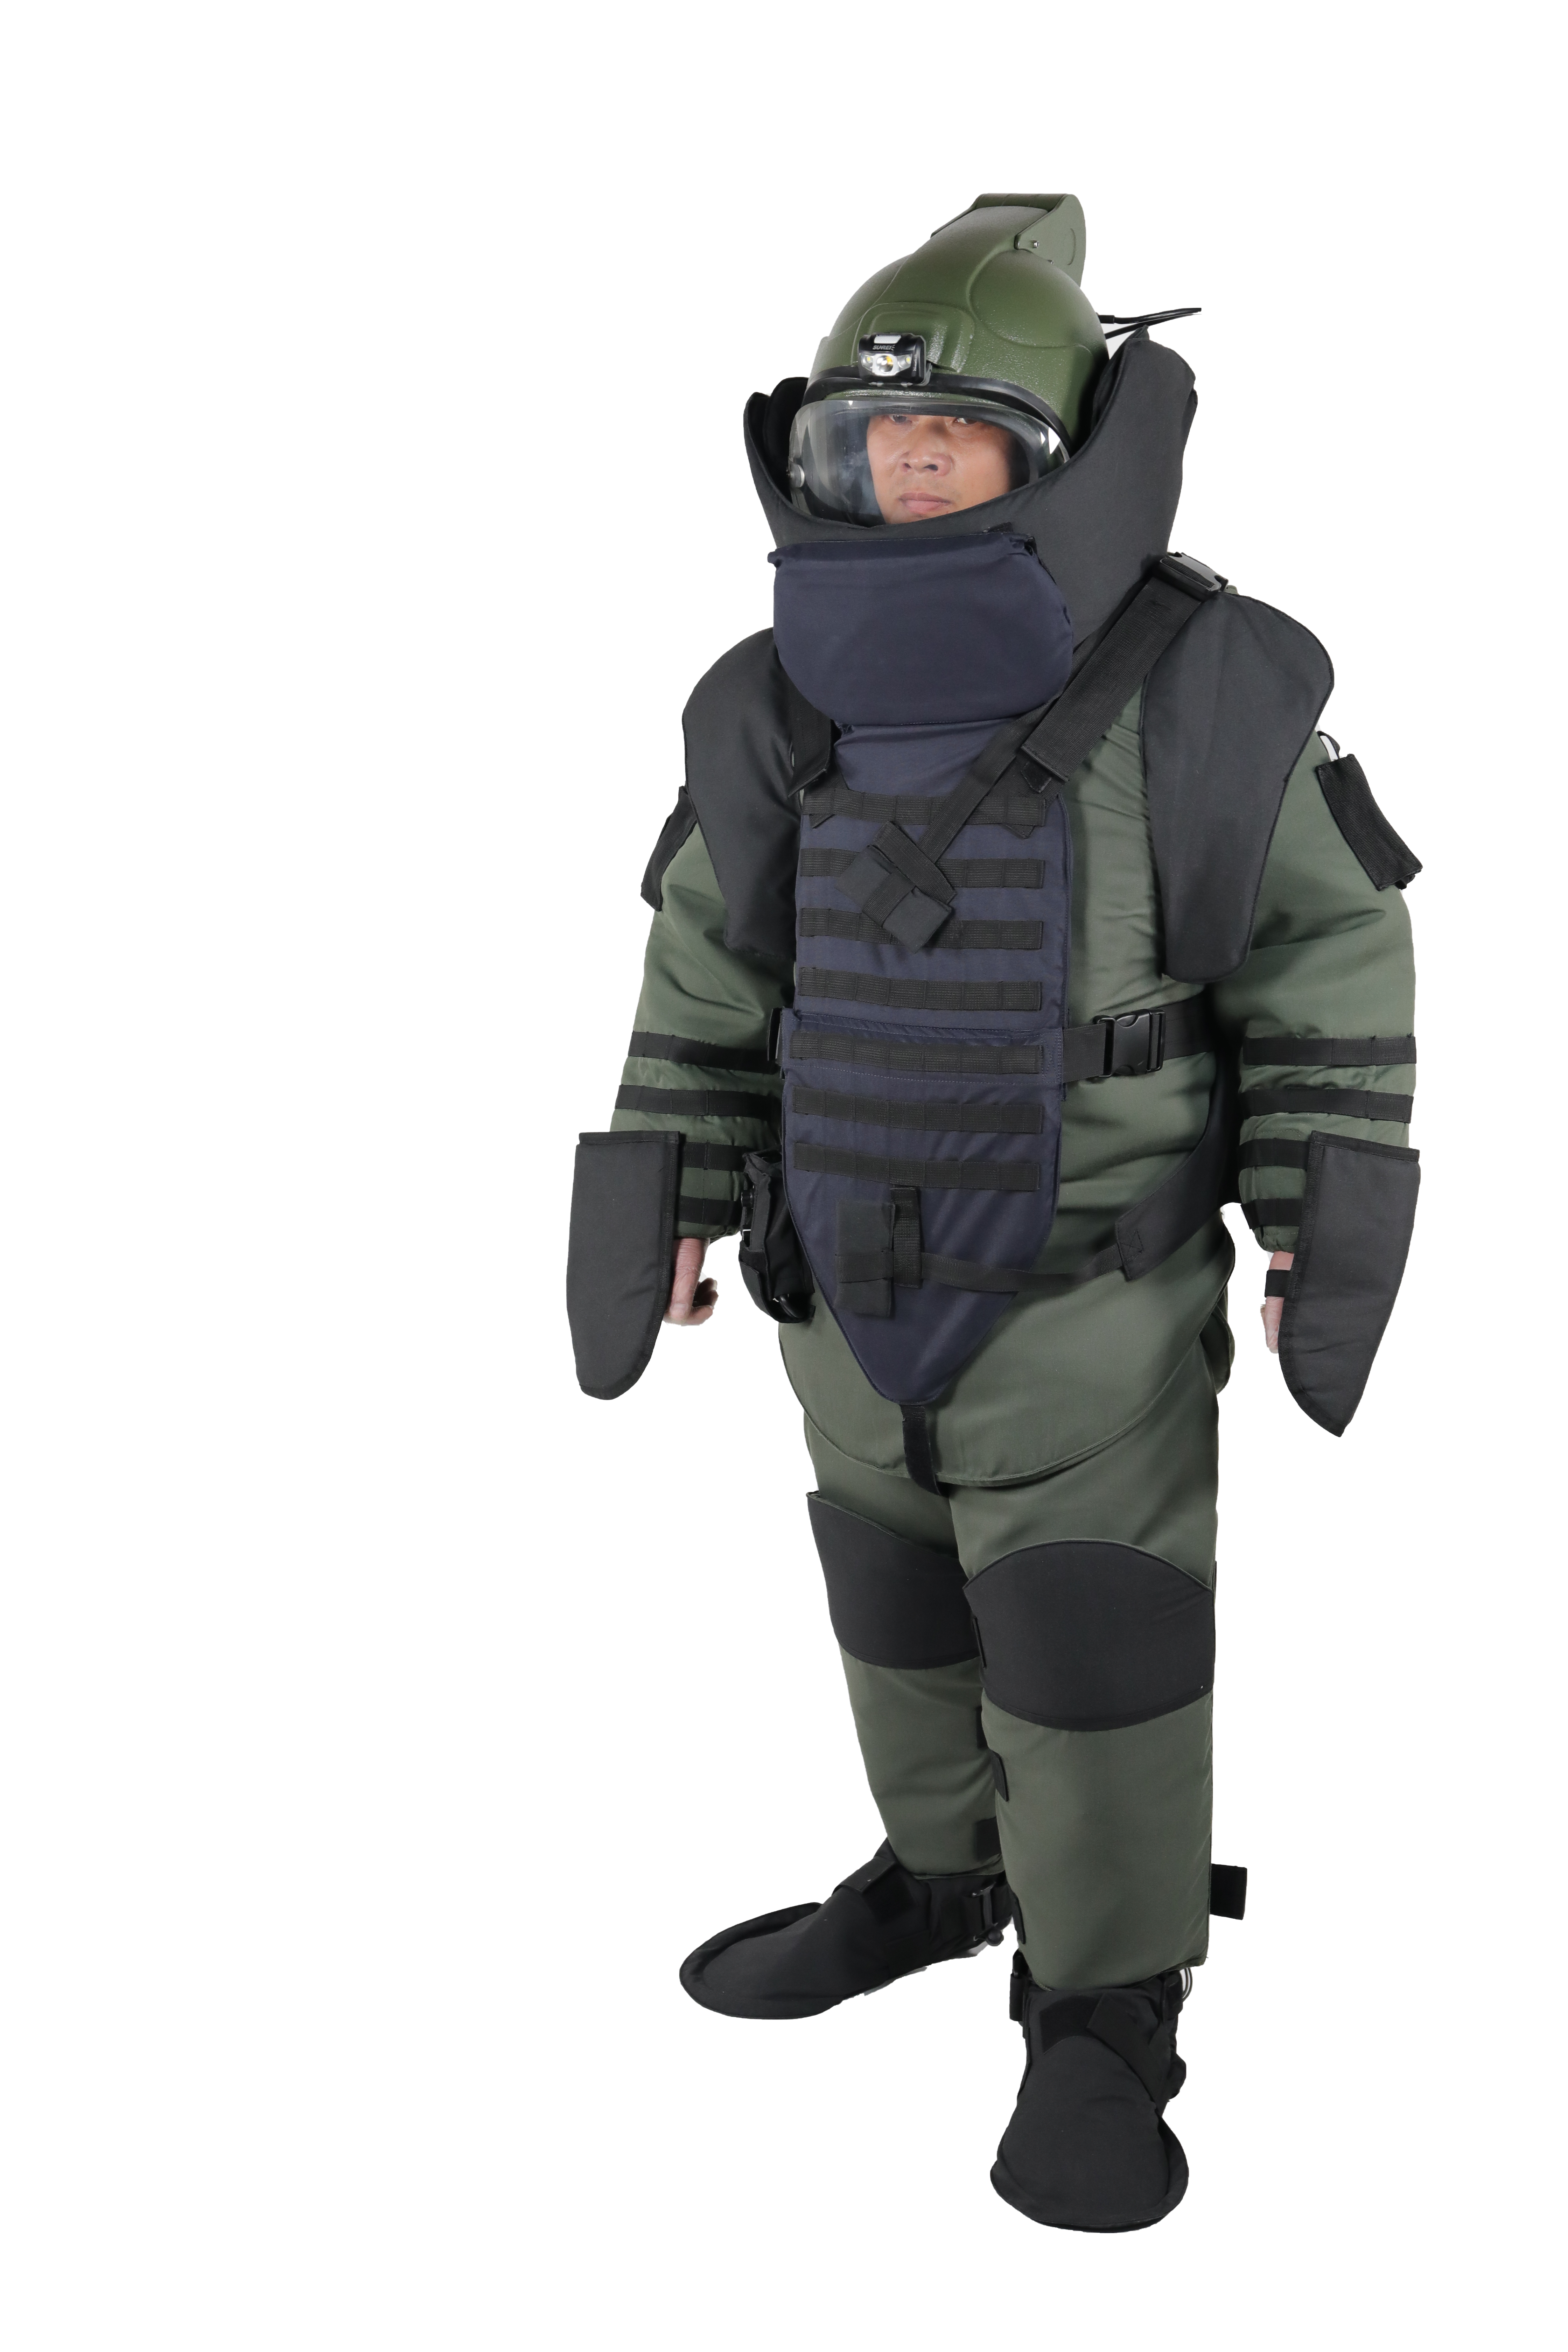 Professional Design Eod Bomb Suit - Police Military Security EOD bomb disposal suit – Heweiyongtai